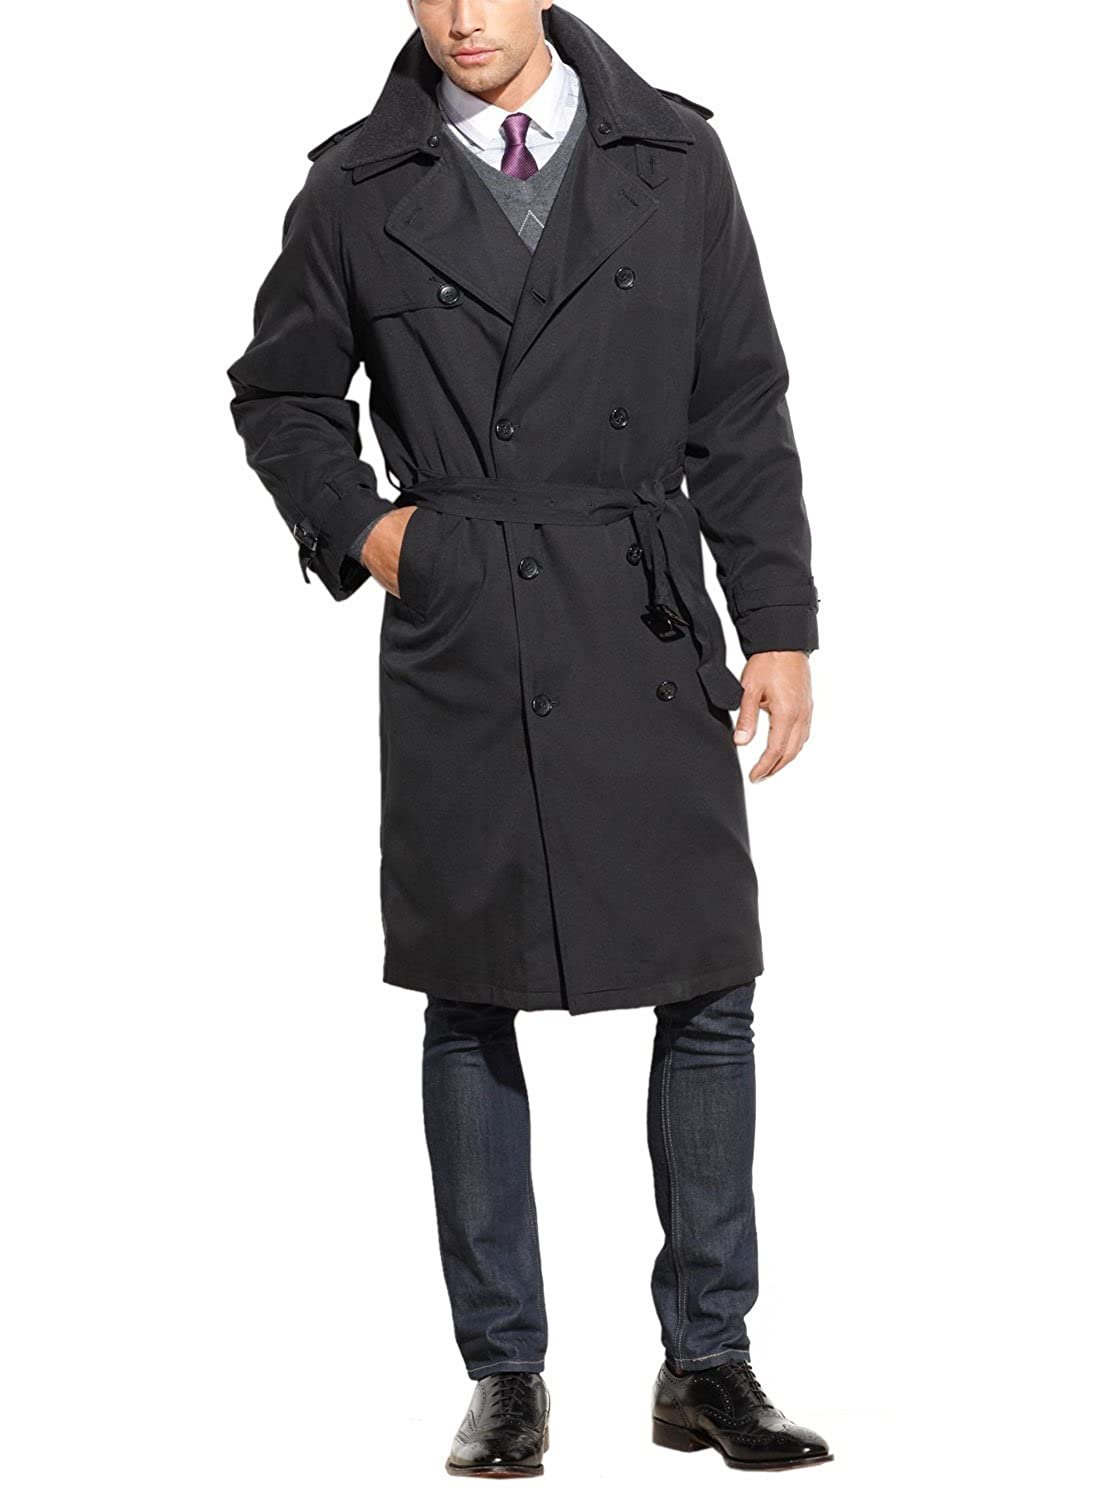 Pre-owned London Fog Men's Raincoat Double Breasted Iconic Trench Coat With Zip-out Liner In Charcoal